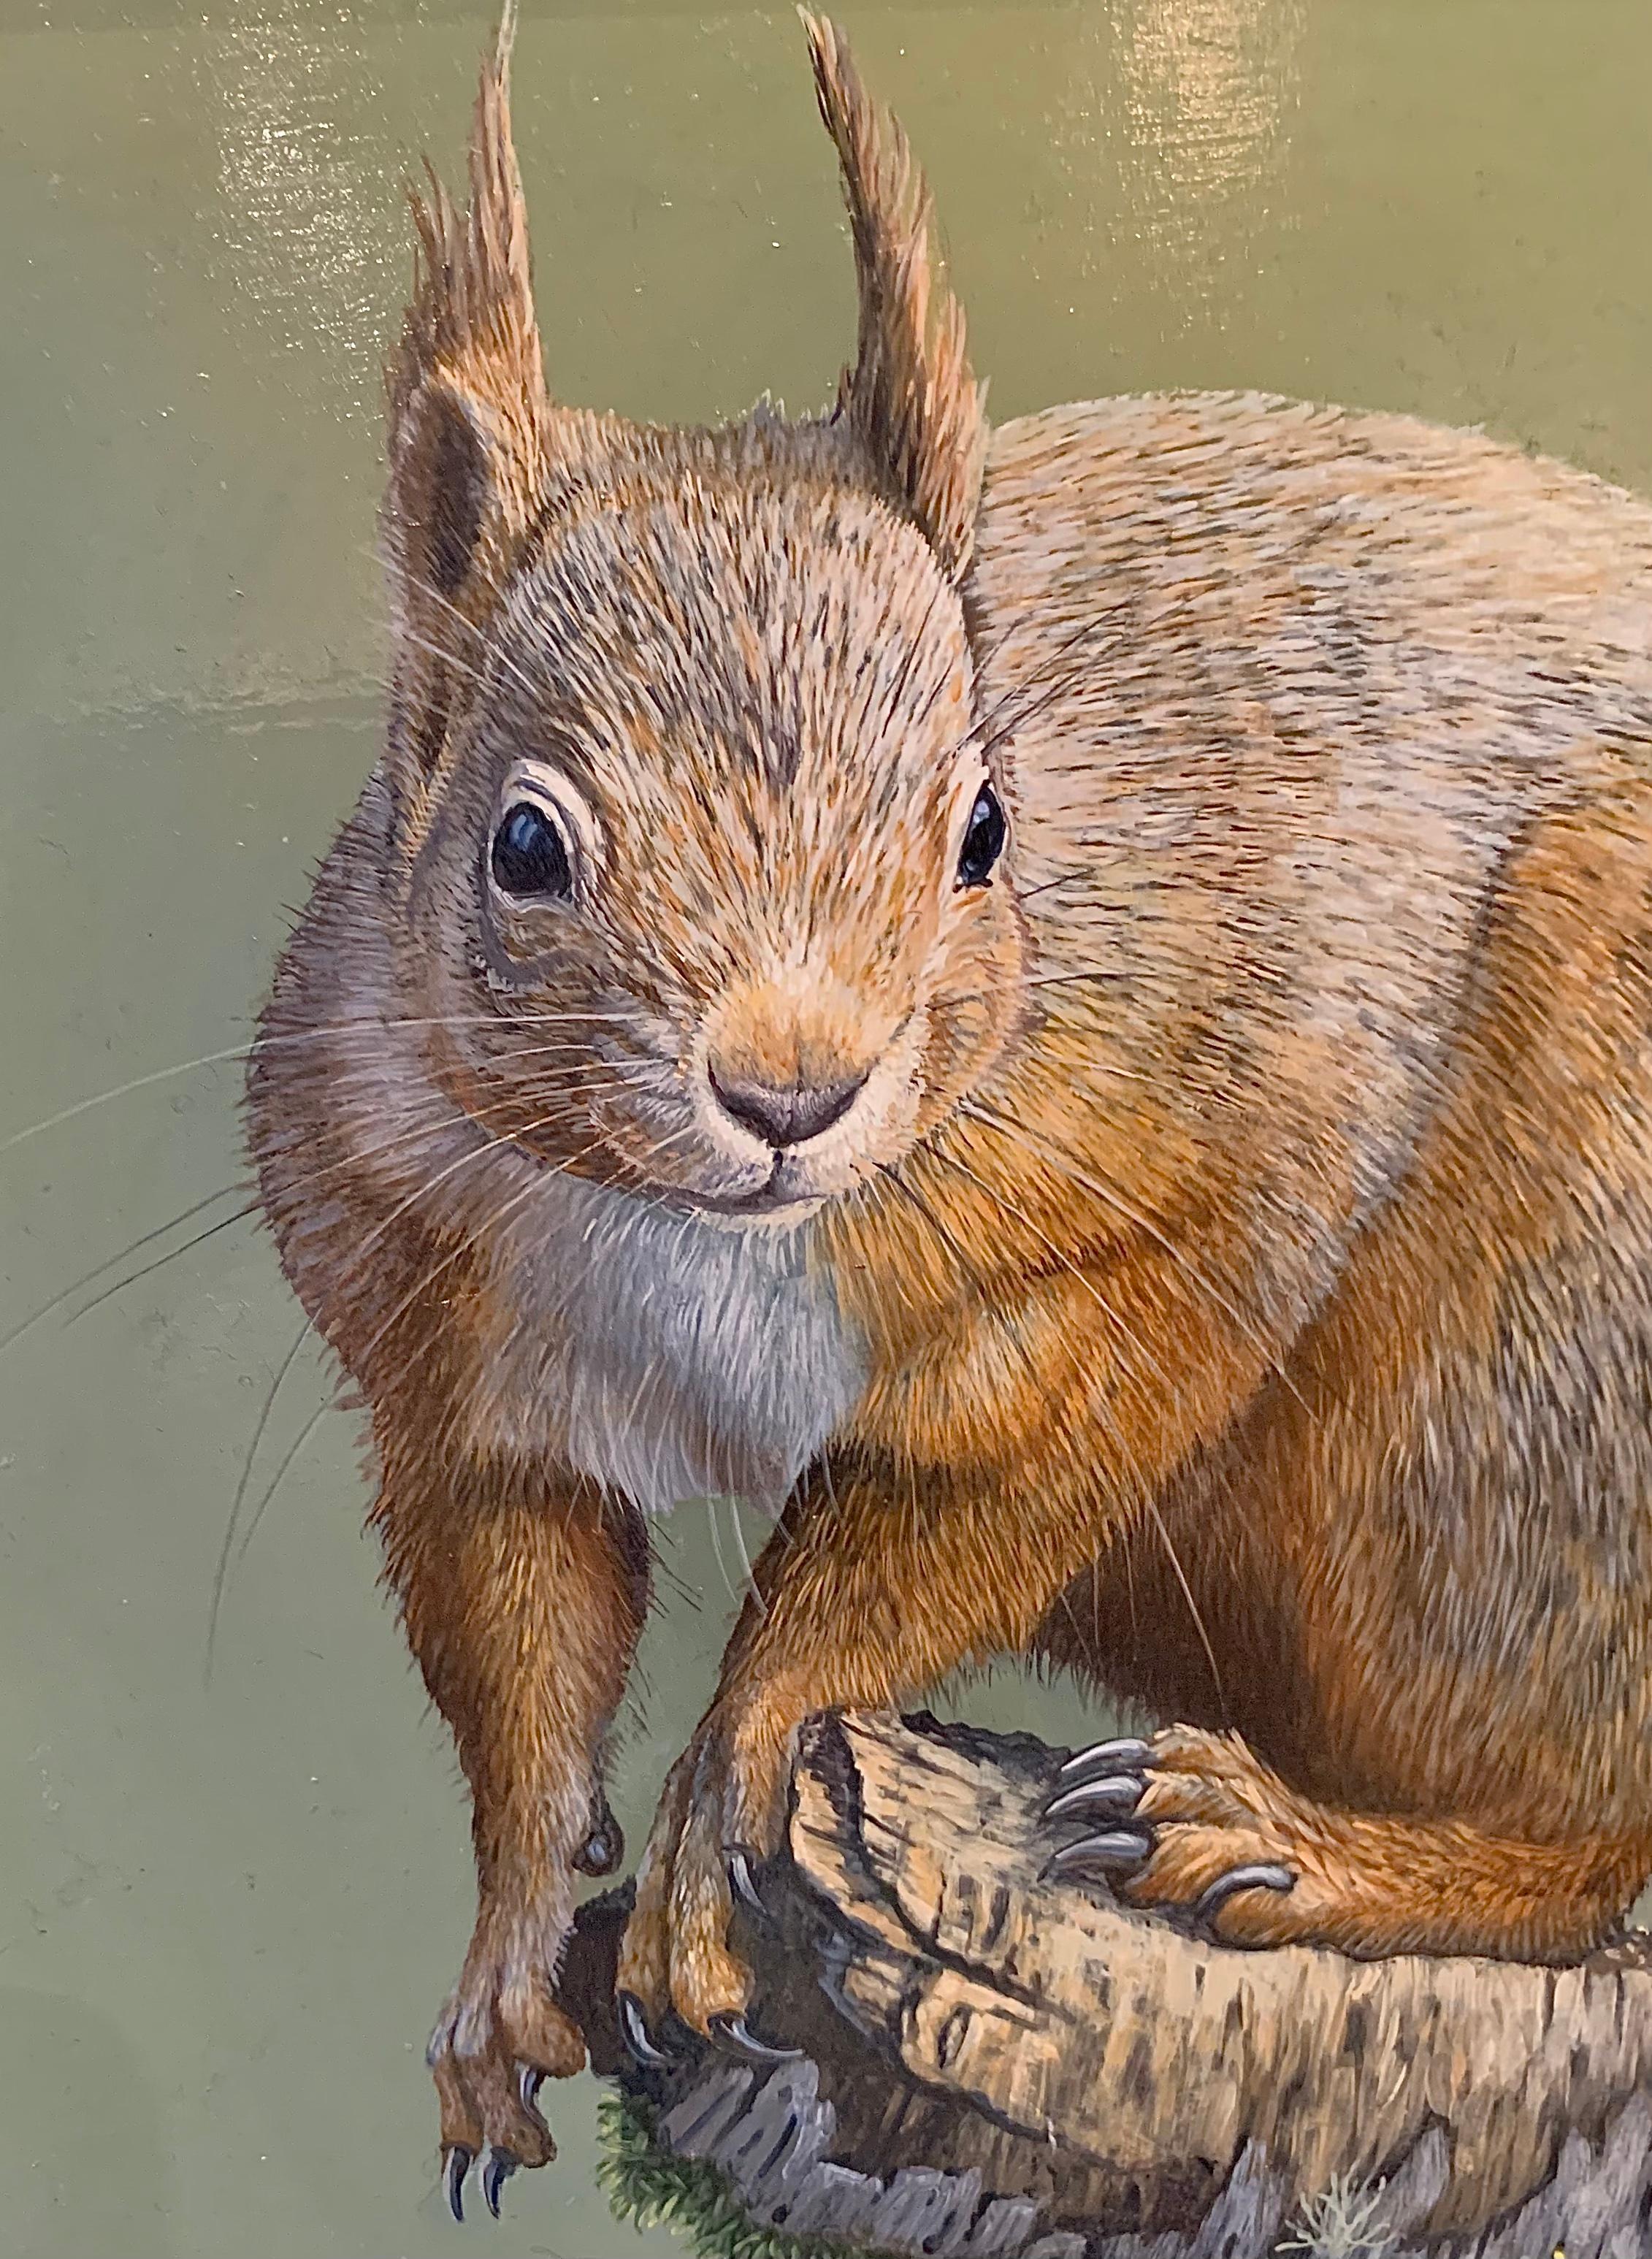 'End of the Road' by Ben Waddams is a Contemporary Realist Wildlife oil painting of Red Squirrel in the wild.  With such incredible detail you can almost feel the beautiful coat of the mammal. 

Ben Waddams is a British wildlife artist living and